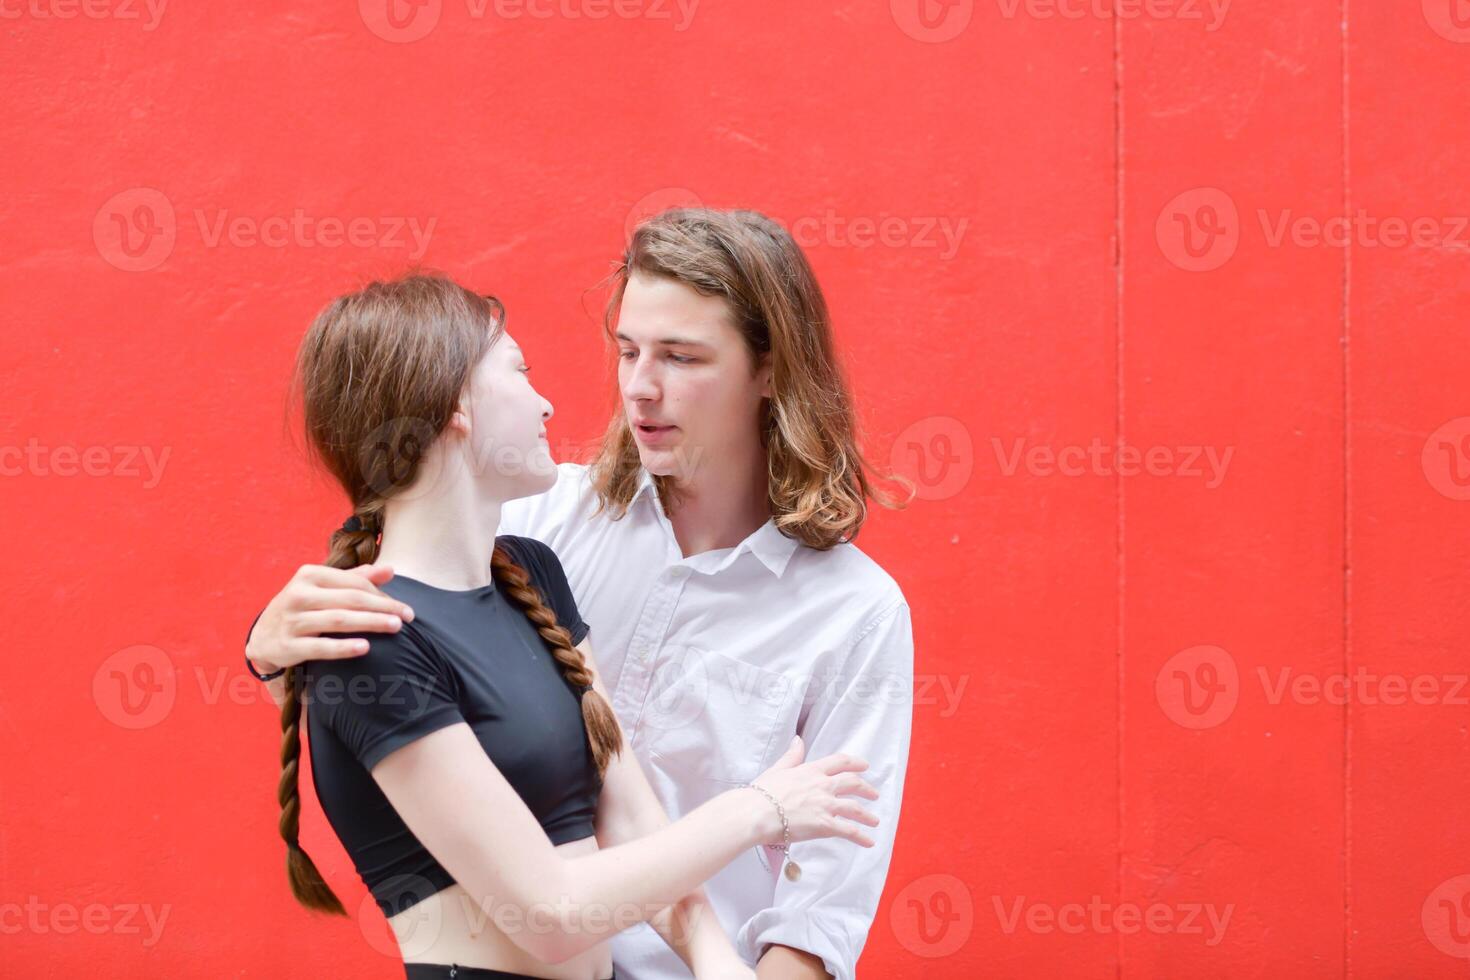 A couple is enjoying a summer vacation in the red wall background, happily showing their love to each other. photo